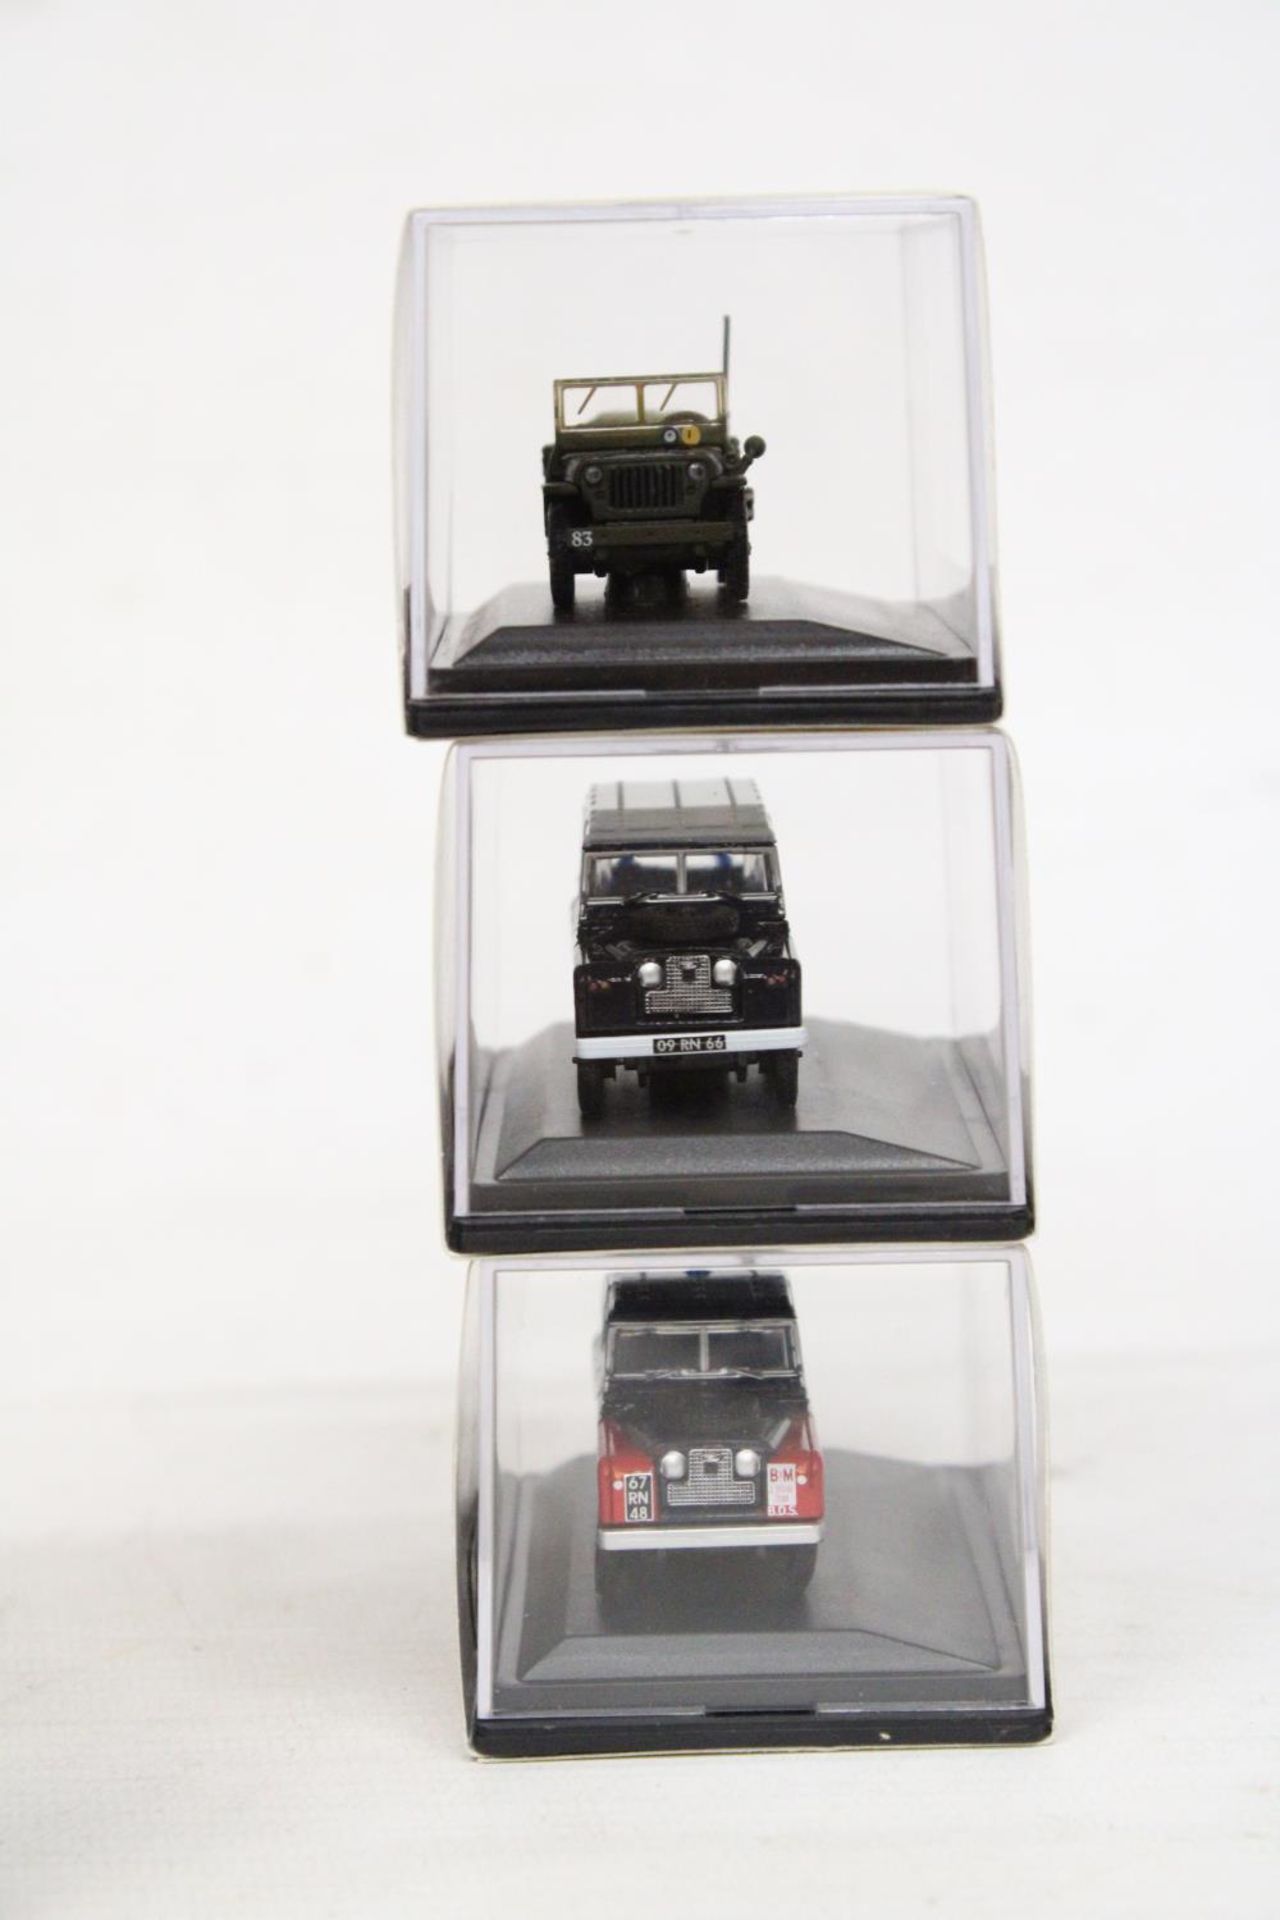 SIX AS NEW AND BOXED OXFORD MILITARY VEHICLES - Image 2 of 6